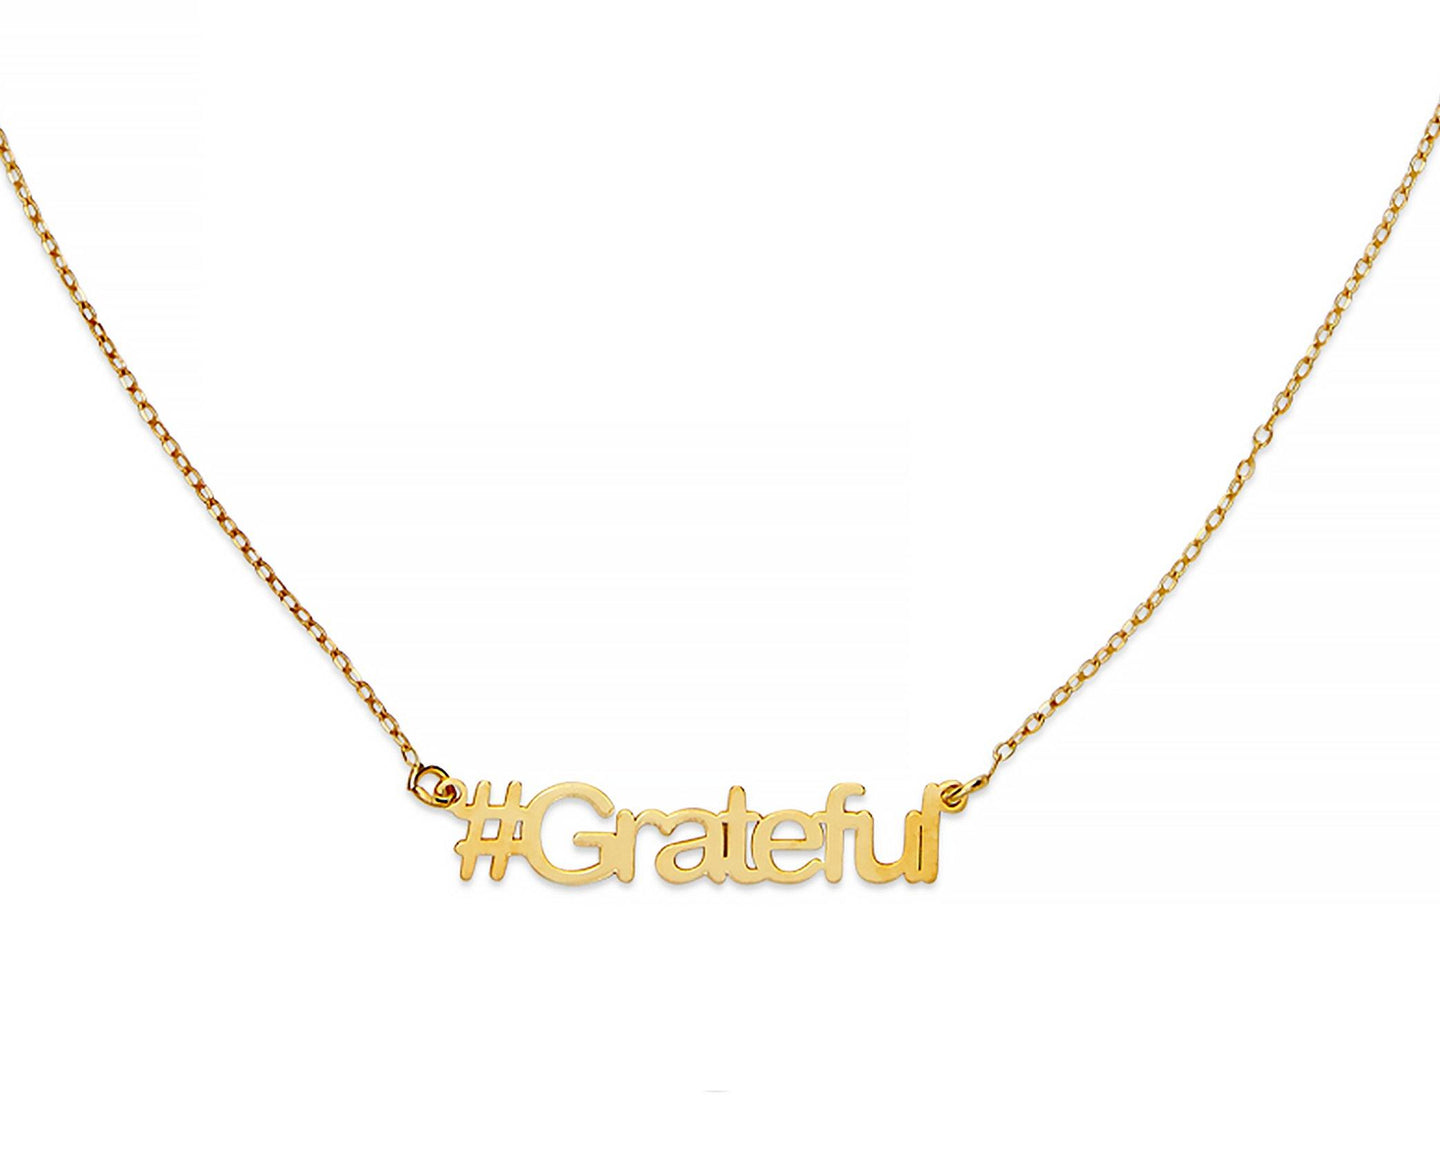 Grateful Hashtag Necklace - InclusiveJewelry